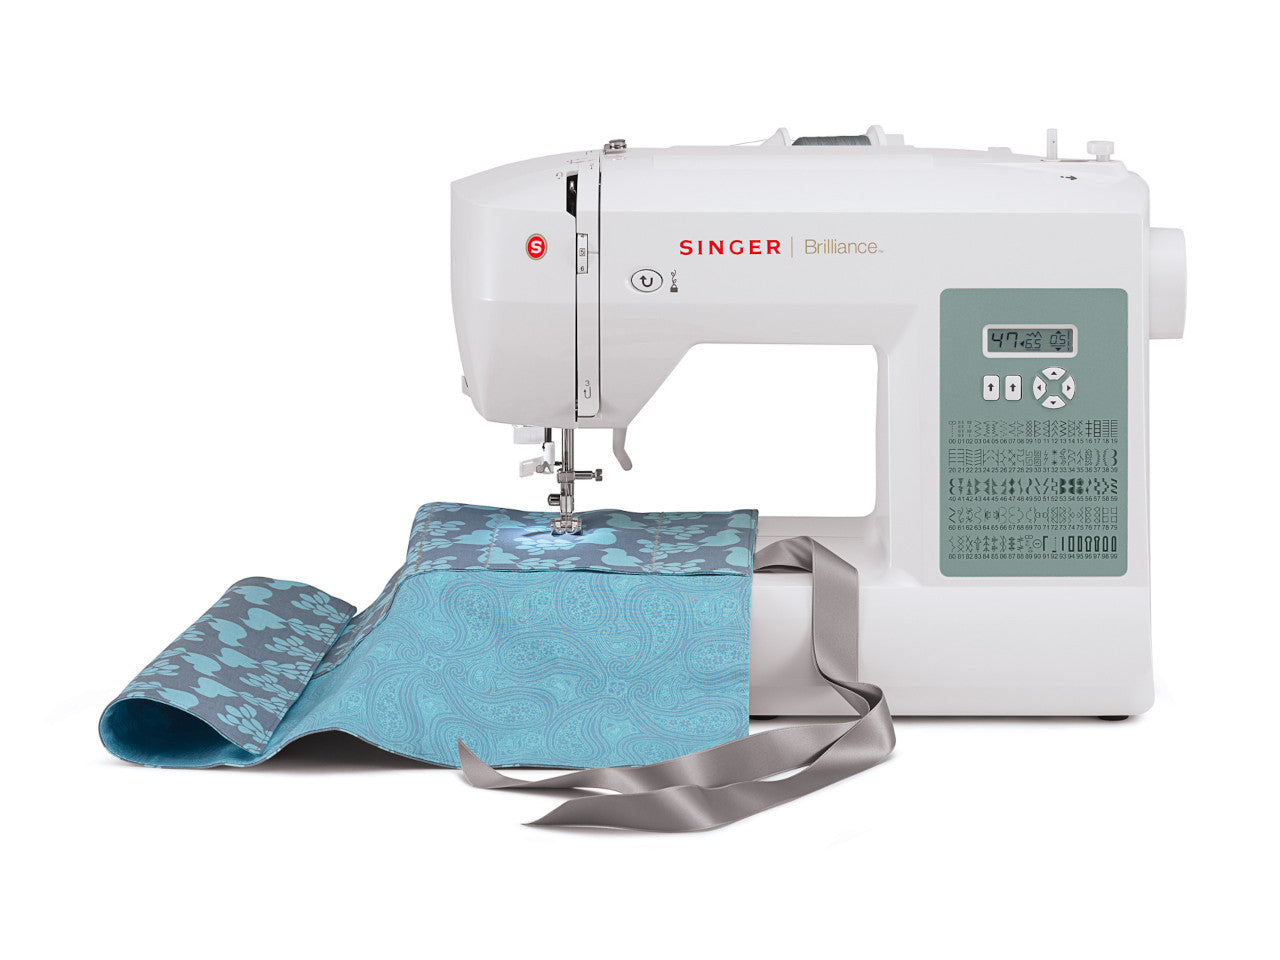 6199-Beauty-project-singer-sewing-machines